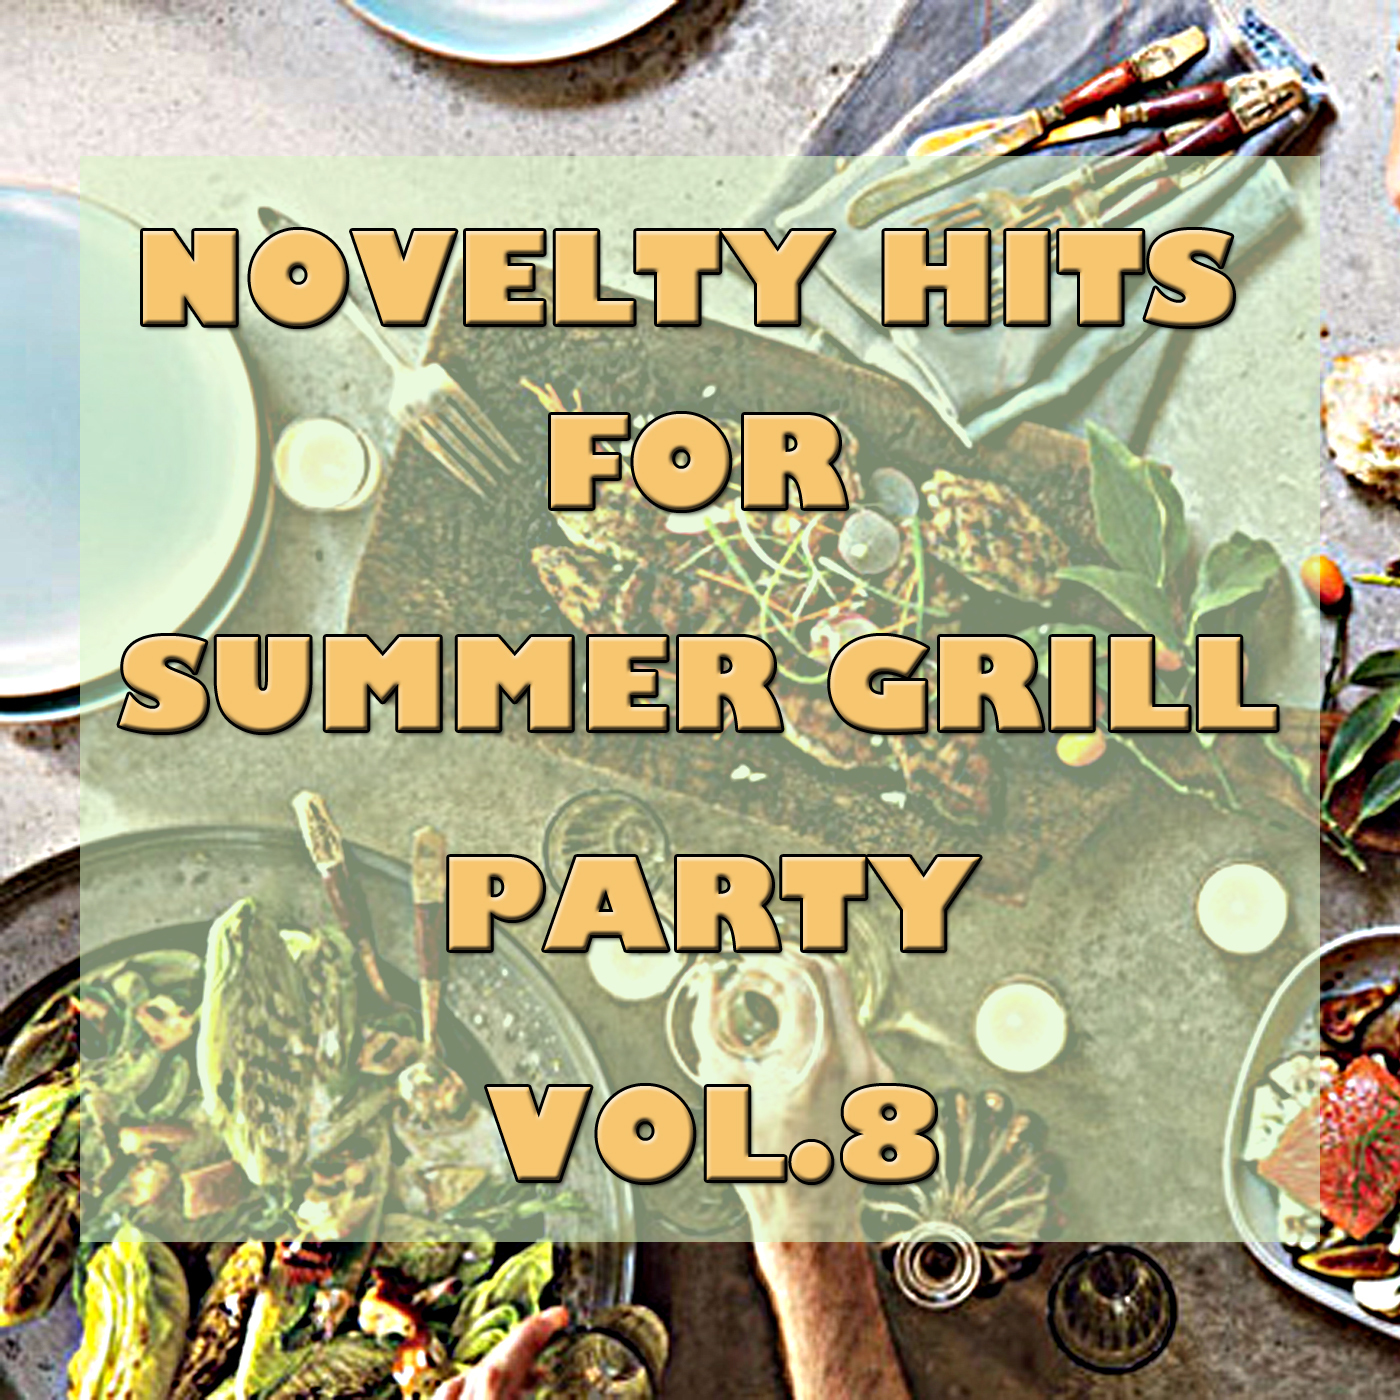 Novelty Hits For Summer Grill Party, Vol.8